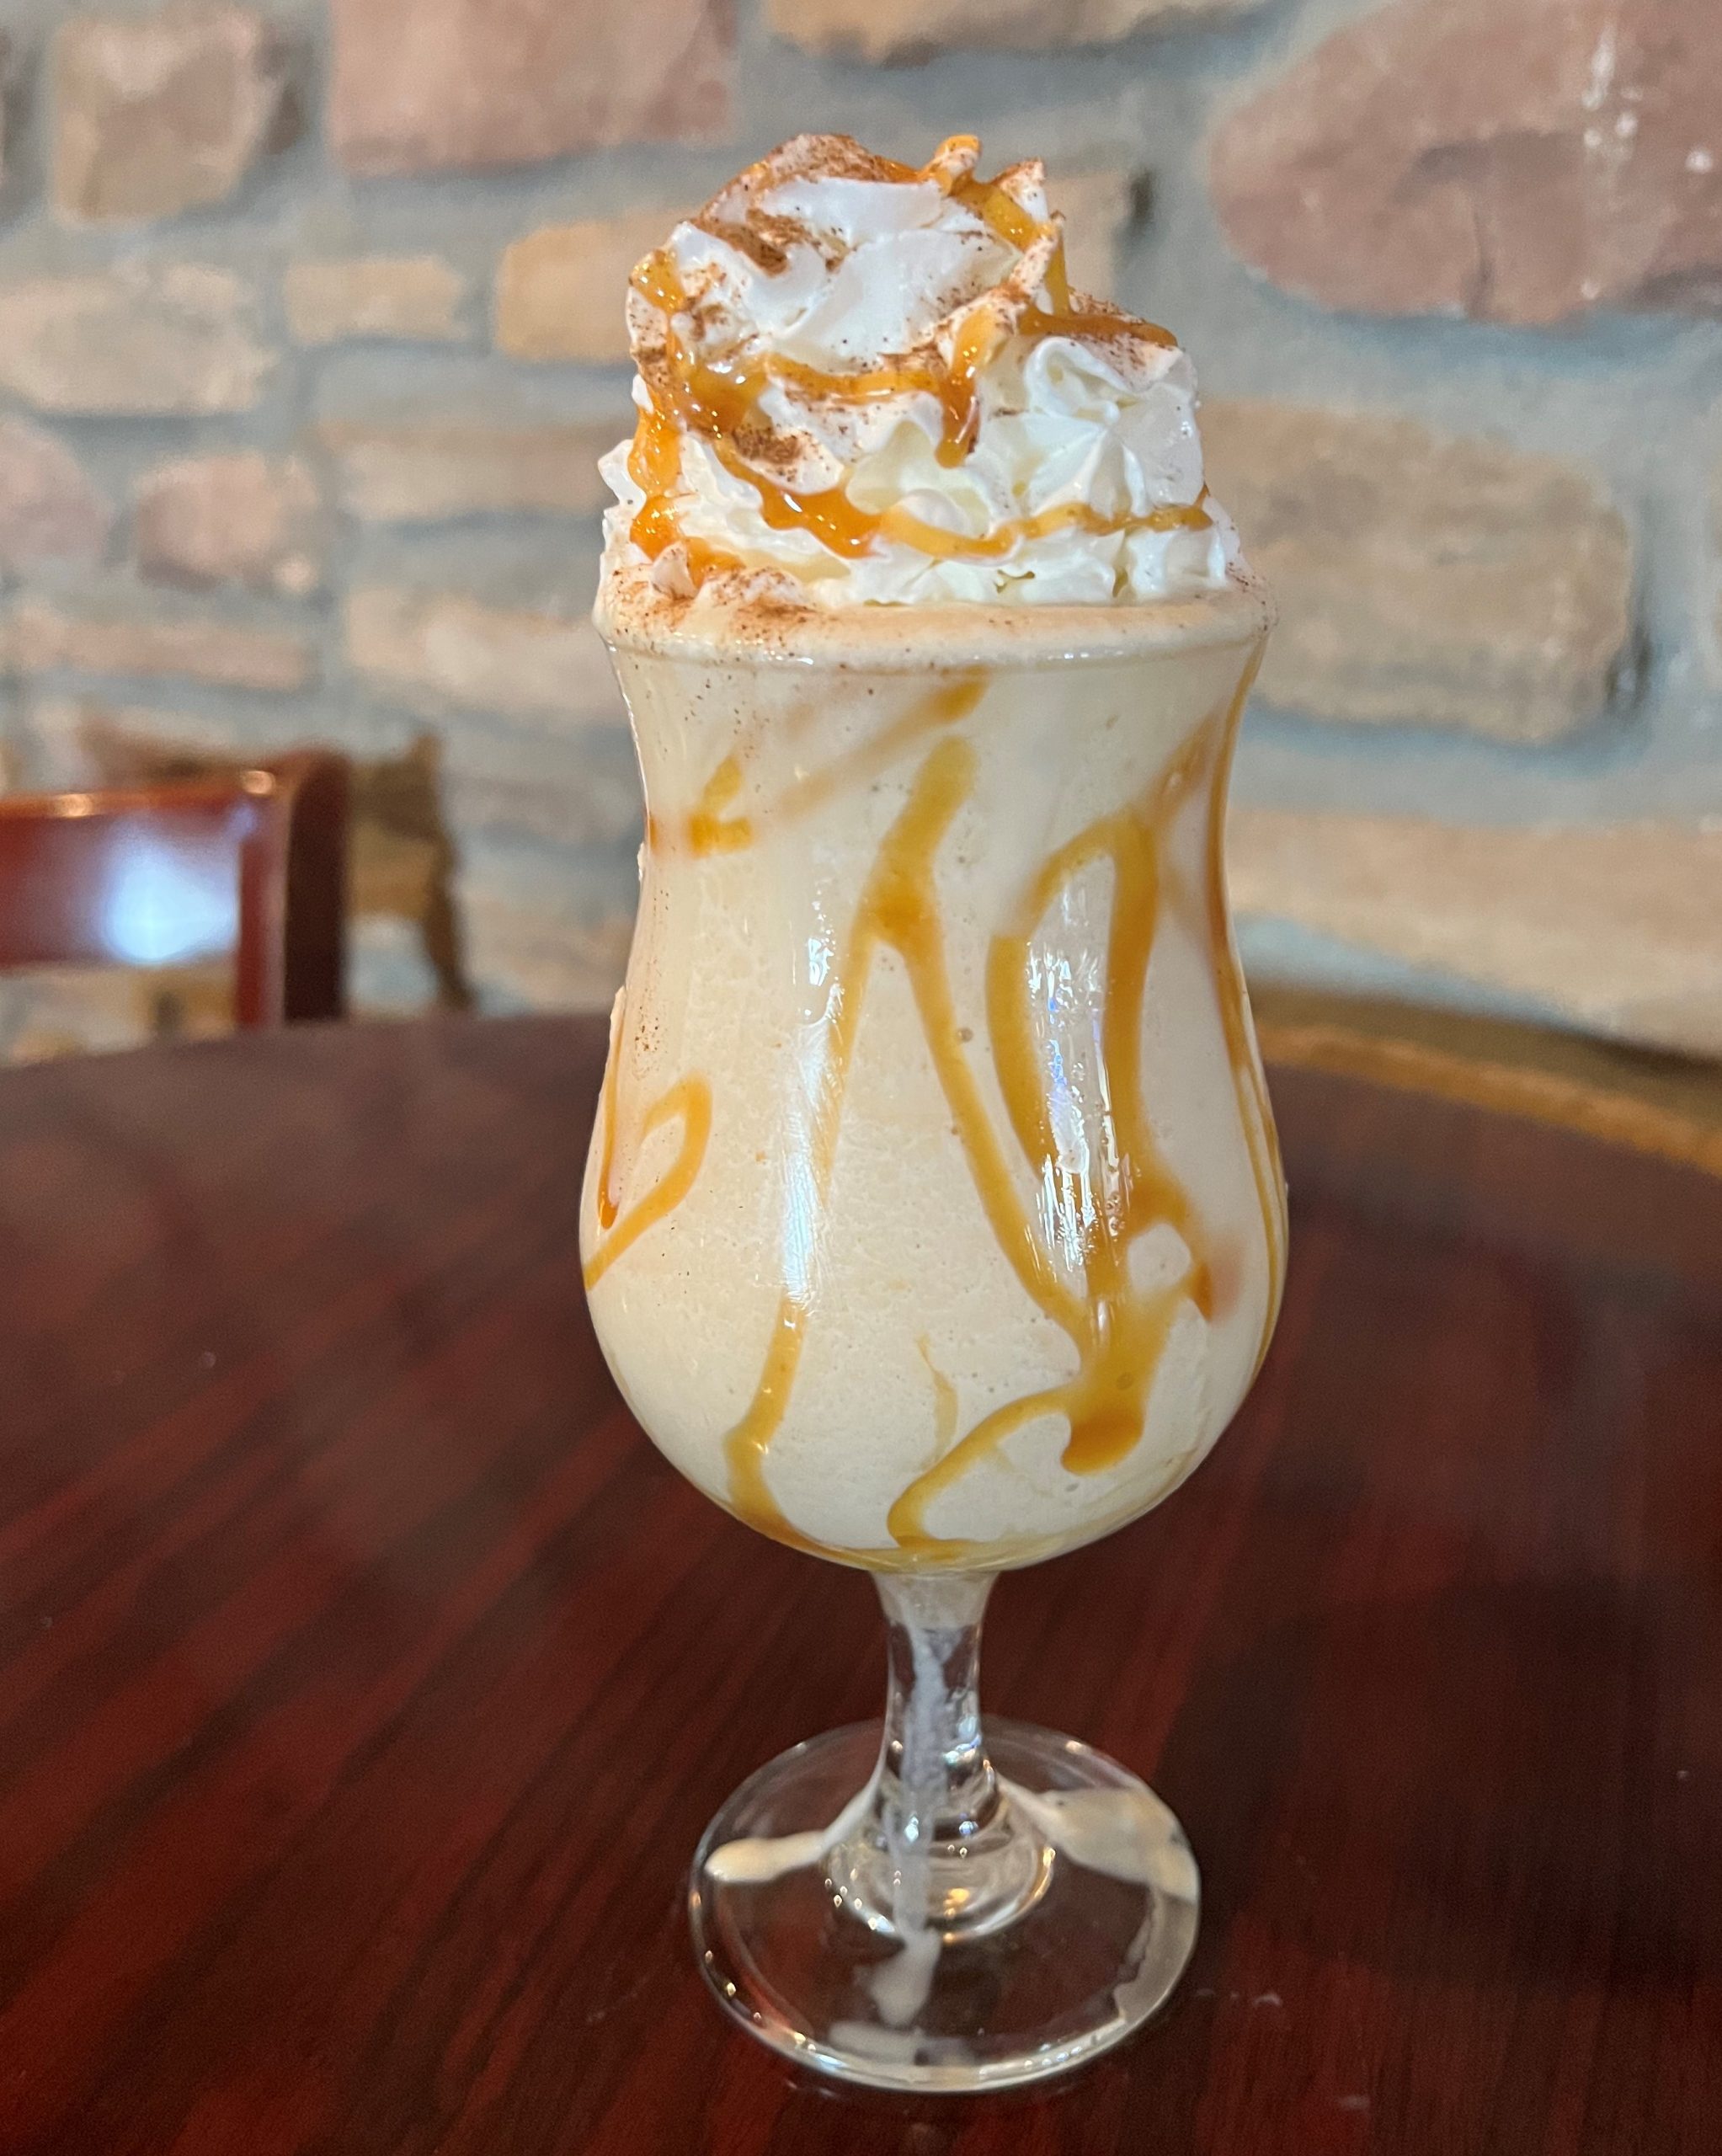 A margarita with caramel and whipped cream sitting on top of a wooden table.